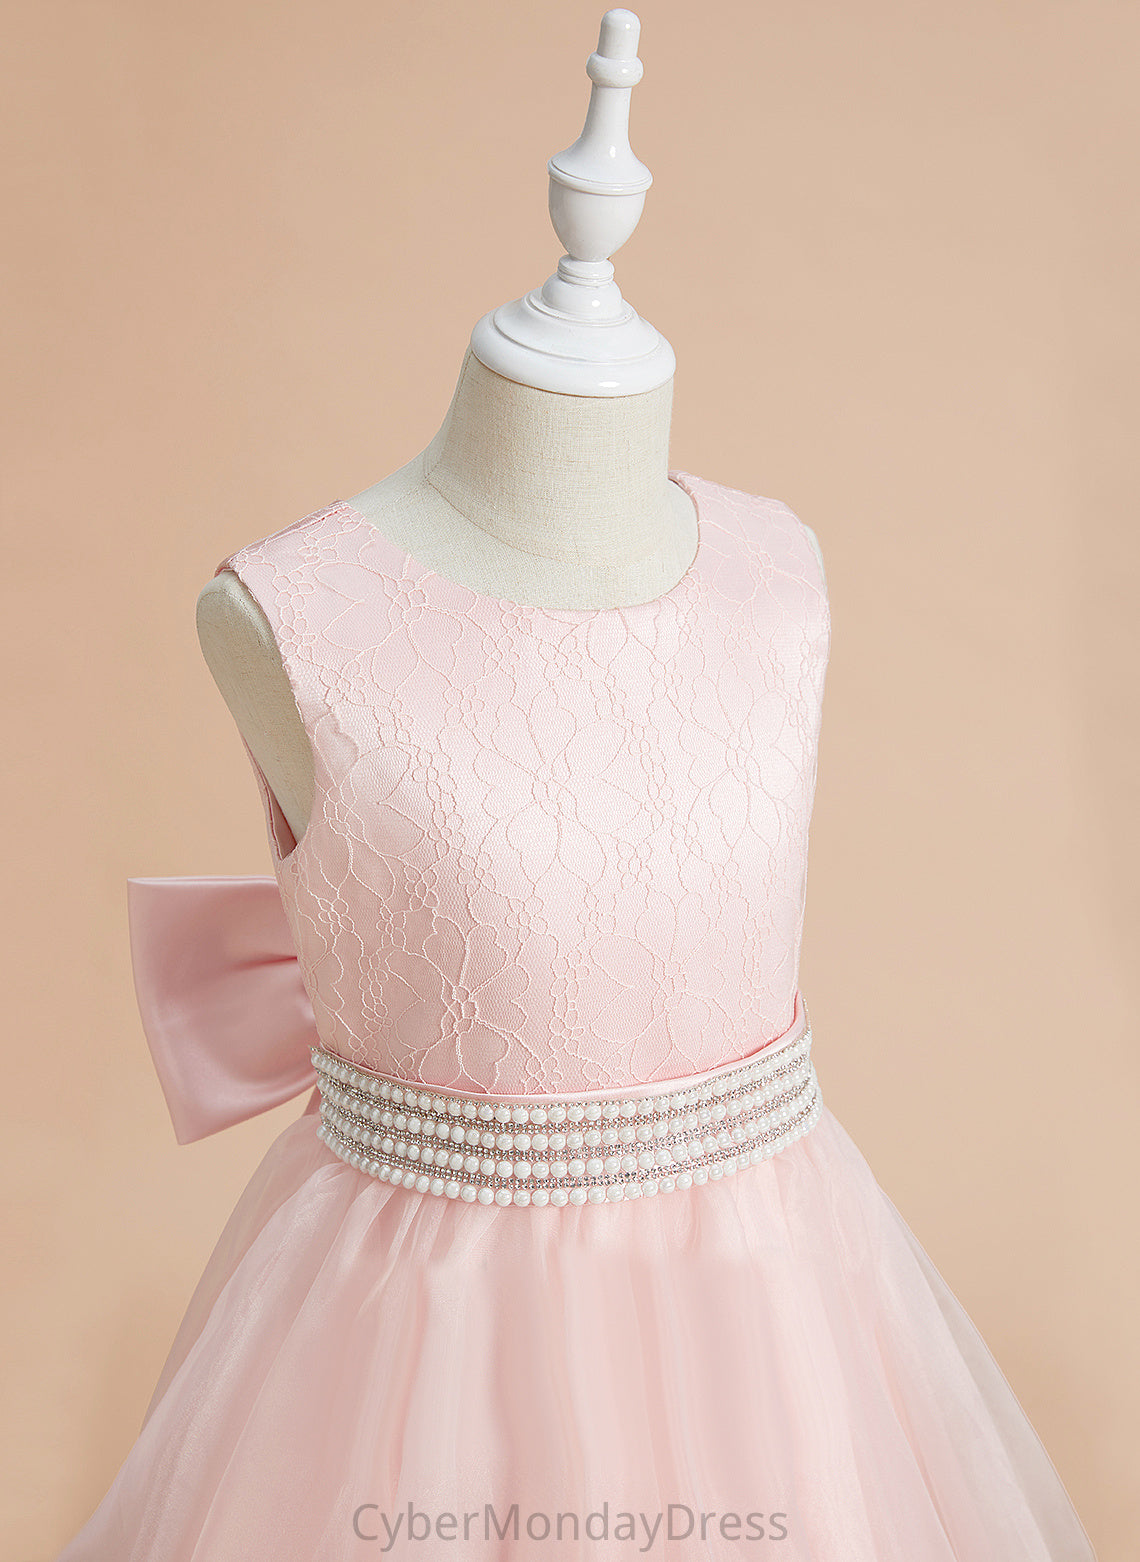 Beading/Bow(s) Dress Flower Girl Dresses Quintina Ankle-length Organza/Lace Ball-Gown/Princess Neck Flower - Girl Sleeveless Scoop With